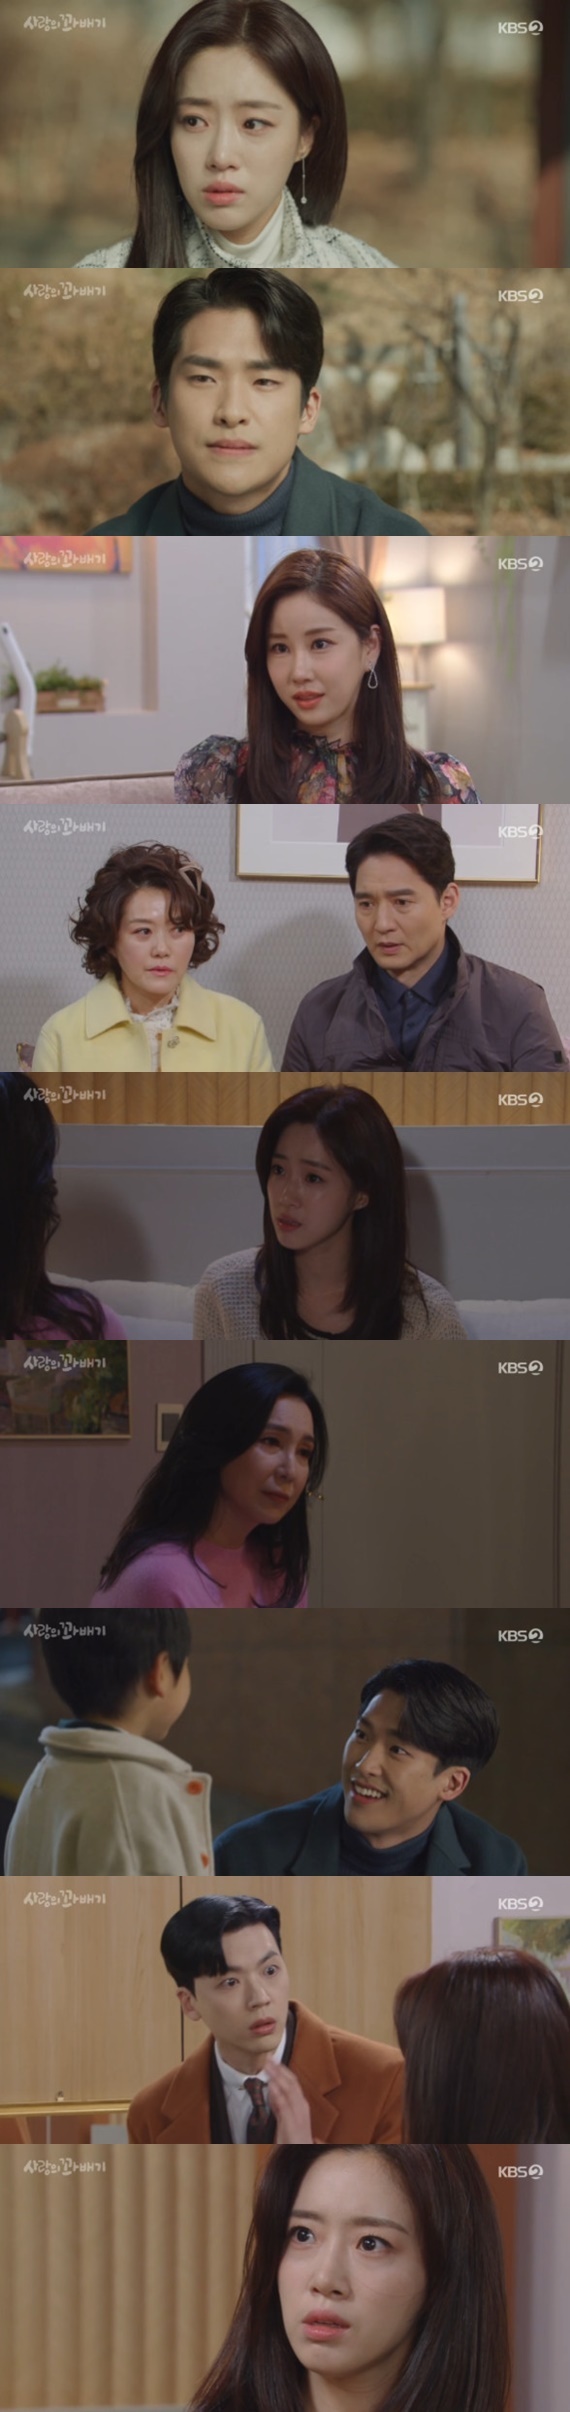 (Seoul=) = Love Twist Ham Eun Jung knew the Affair of Jang Se-hyeun, and notified the divorce.In the KBS 2TV daily drama Love Twist (playplayed by Lee Eun-joo/directed by Kim Won-yong), which was broadcast at 7:50 pm on 9th day, it included the image of Oh Sound (Ham Eun Jung), who learned about the relationship between Cho Kyung-jun (Jang Se-hye) and Kim Jo-ri (played by Kim Jo-ri).Osund witnessed the secret meeting of Cho Kyung-joon and Shin Doohee, and he was devastated to know that Cho Kyung-joon married himself because of money, saying, It was all a lie in the end.Then Osund wept alone, waiting for the House of Representatives of Kindergarten by Son Cho Han-bum (Park Jae-joon).At that time, Park Ha-ru (Kim Jin-yeop), who went to pick up Park Sae-byeol (Yoon Chae-na), witnessed such an missound.Osund, who was sitting side by side with Park Ha-ru while playing in the playground, said, I was punished now, I should not have done it. He blamed himself for marrying Cho Kyung-joon.What am I going to do? Osound asked Park to leave, asking her to join him.Meanwhile, Cho Dong-man (Yoo Tae-woong) and Hwang Mi-ja (Oh Young-sil) visited Shin Dohee and told him their position because they thought that he could not be the one to end the new Dohee (Kim Jo-ri).Then, the angry god, Dohee, said, Do not touch me. Five years ago, he threatened to expose all the false reports that Cho Kyung-joon reported to Oh Tae-bong (Hwang Bum-sik).Oh Sound asked Maeng Ok-hee (Shim Hye-jin) if she ever regretted her diversion with Oh Kwang-nam (Yoon Da-hoon).So, Maeng Ok-hee said, I do not regret it when I look at my mothers life, and the couple thought that it was over when the faith was broken.Decision-making Ossound told Cho Kyung-jun, Lets divorce.When Cho Kyung-joon asked if it was because of Park Ha-ru, the angry Osund hit Cho Kyung-joons cheek and said, Now I live with your son.KBS 2TV daily drama Love Twist is a drama about the comic melodrama of the family members who have been twisted by love and life because of lies. It is broadcast every Monday through Friday at 7:50 pm.